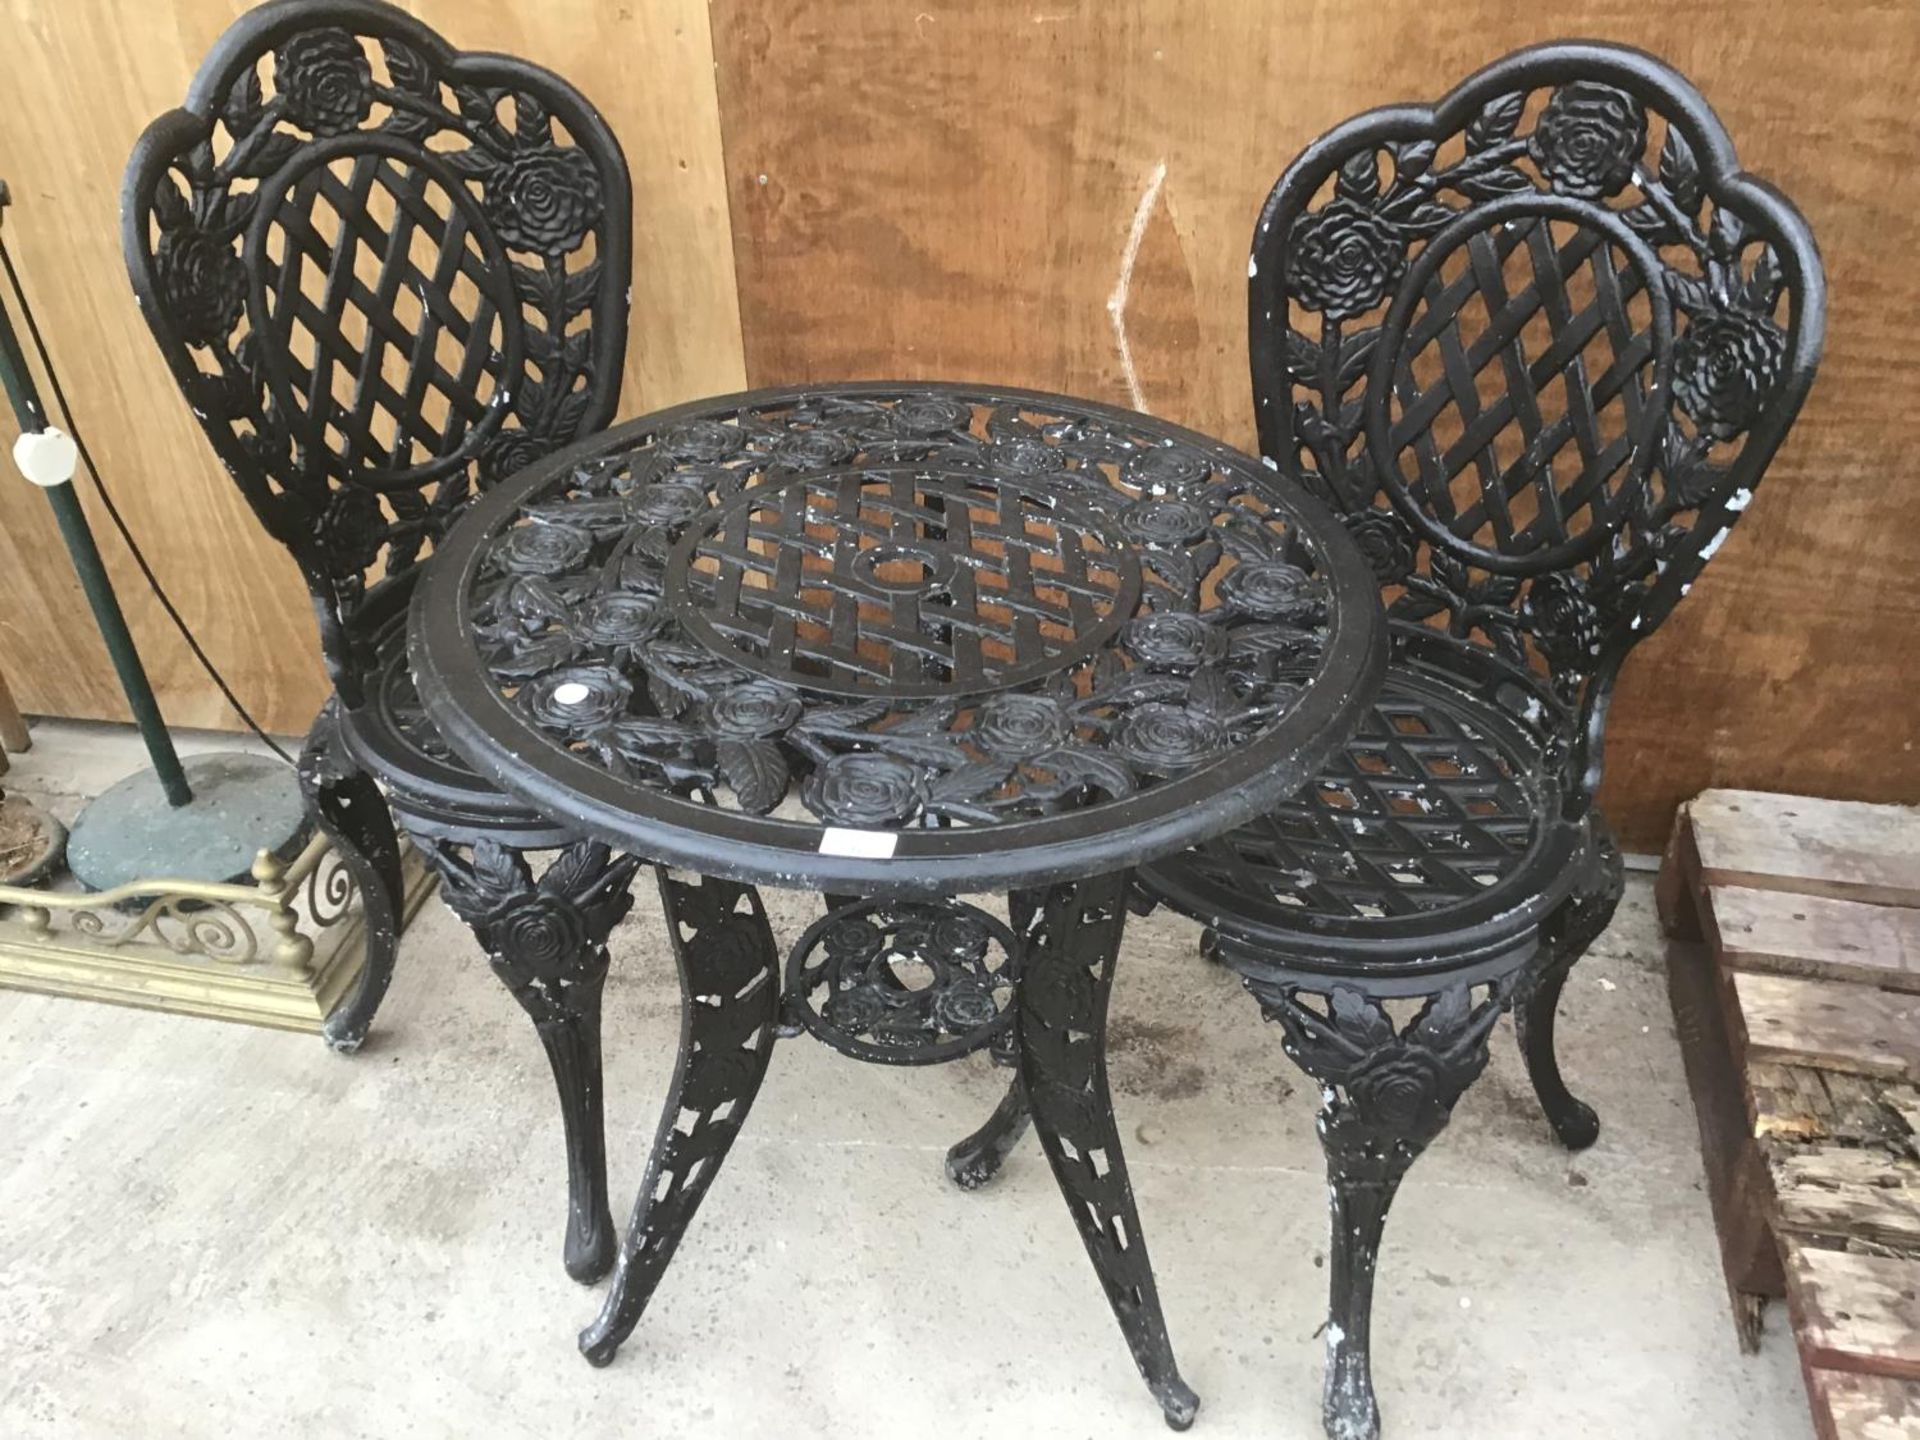 A HEAVY CAST IRON ROSE DESIGN TABLE WITH TWO MATCHING CHAIRS